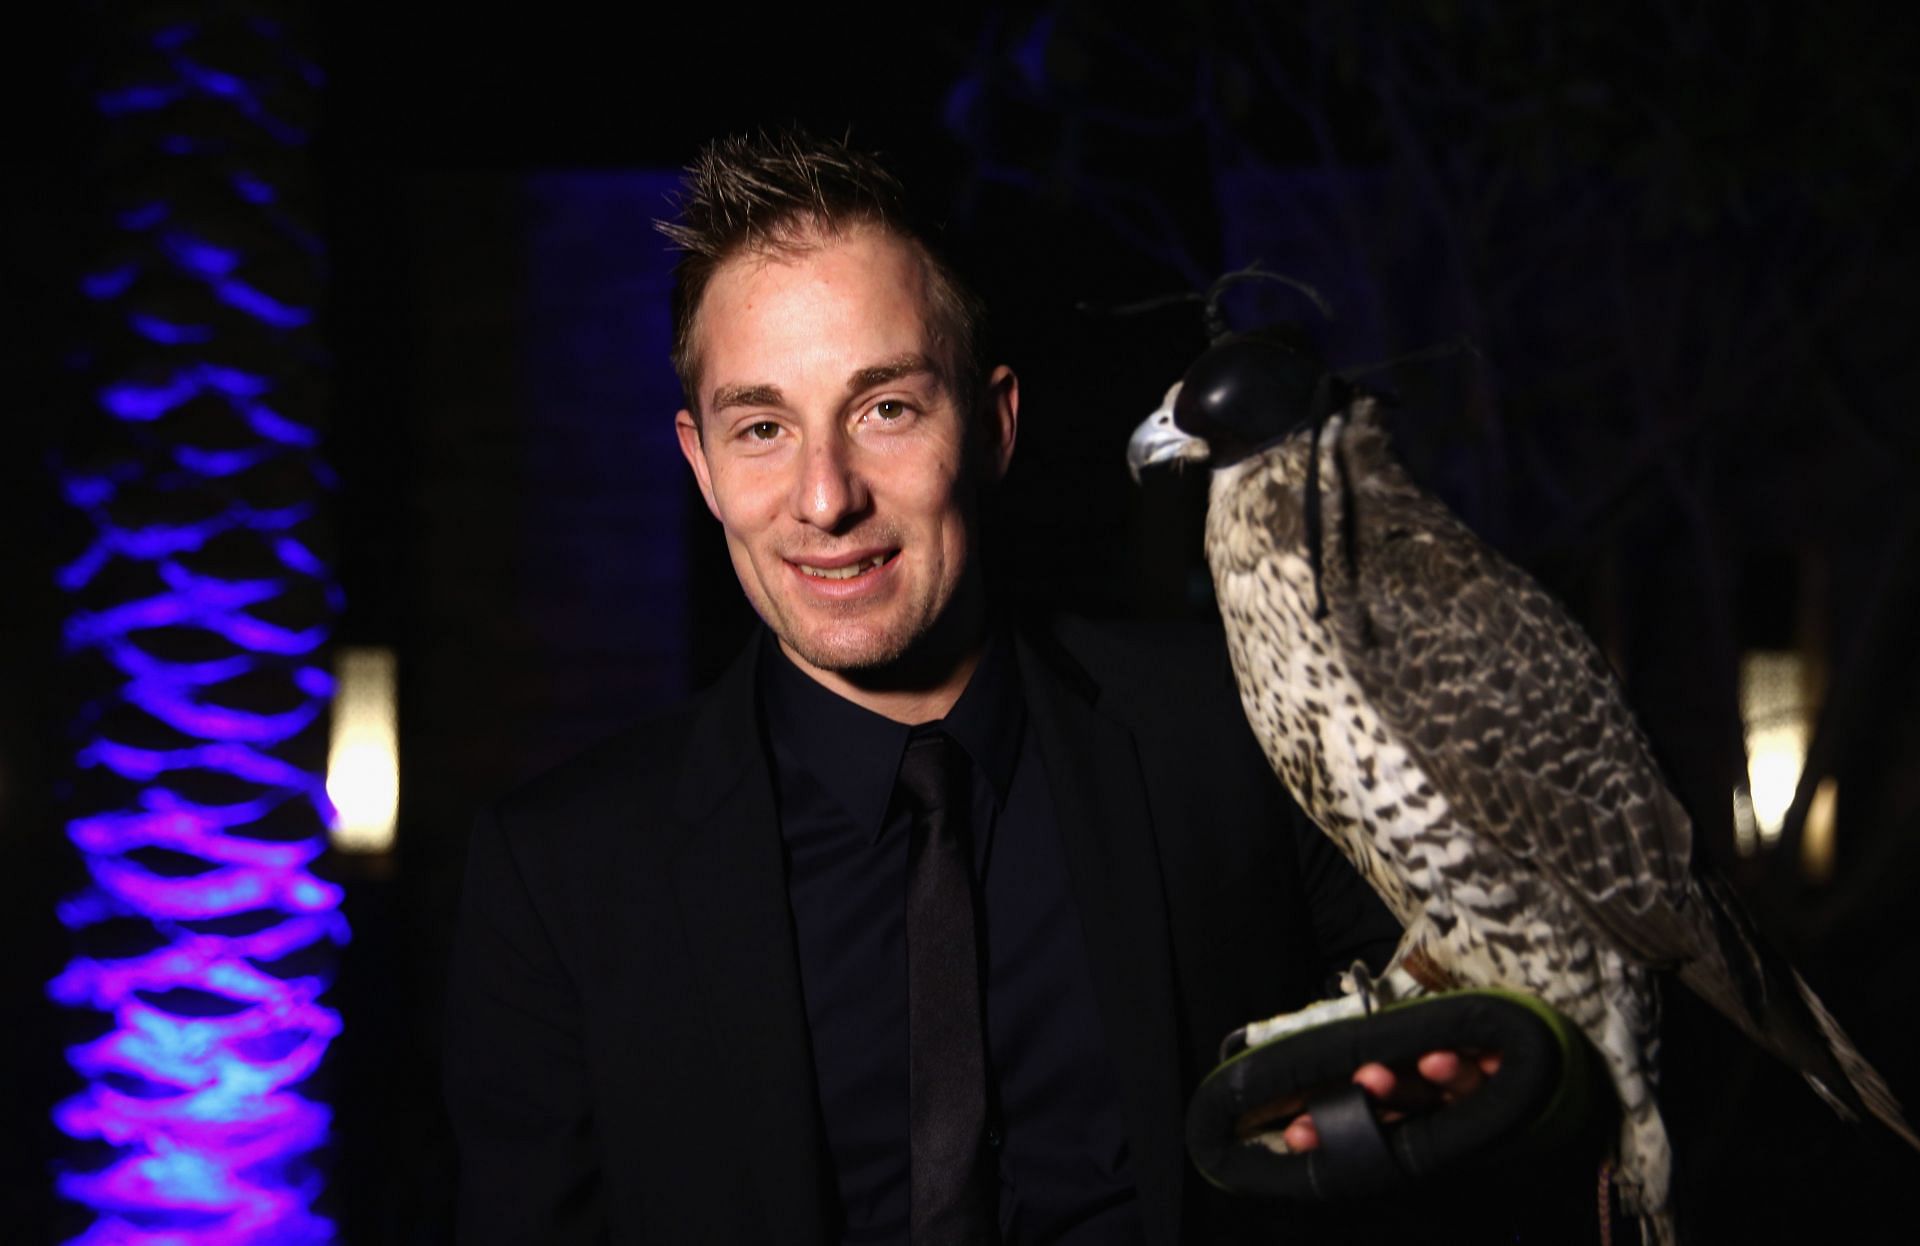 Peter Gade at the 2014 BWF Destination Dubai World Superseries Finals - Gala Dinner (Image credits: Getty Images)